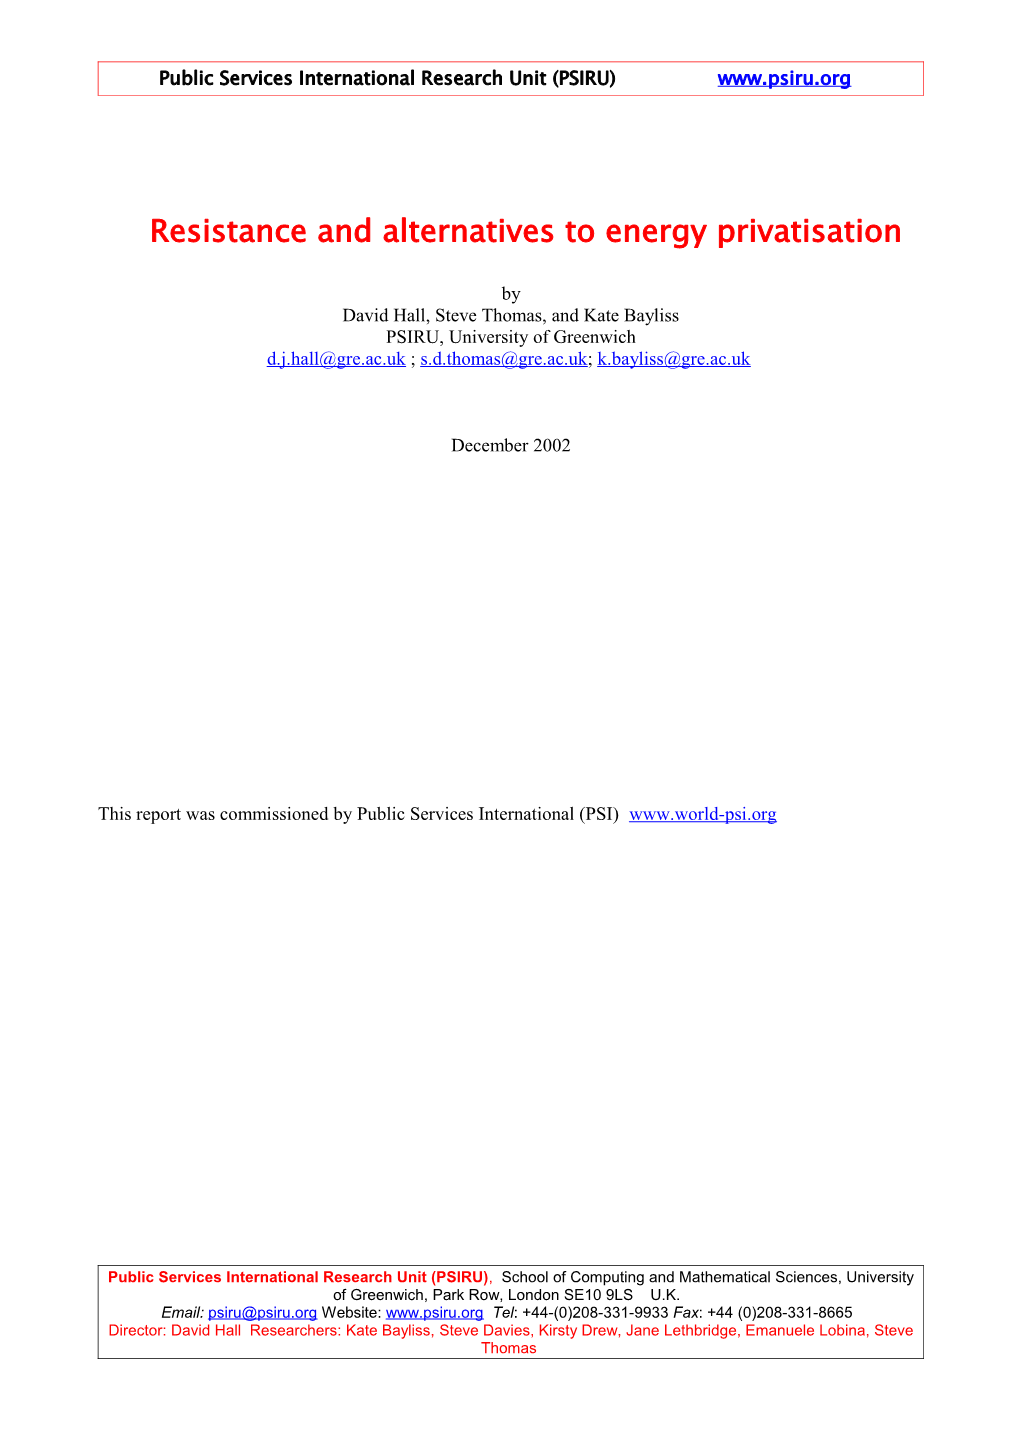 Resistance and Alternatives to Energy Privatisation